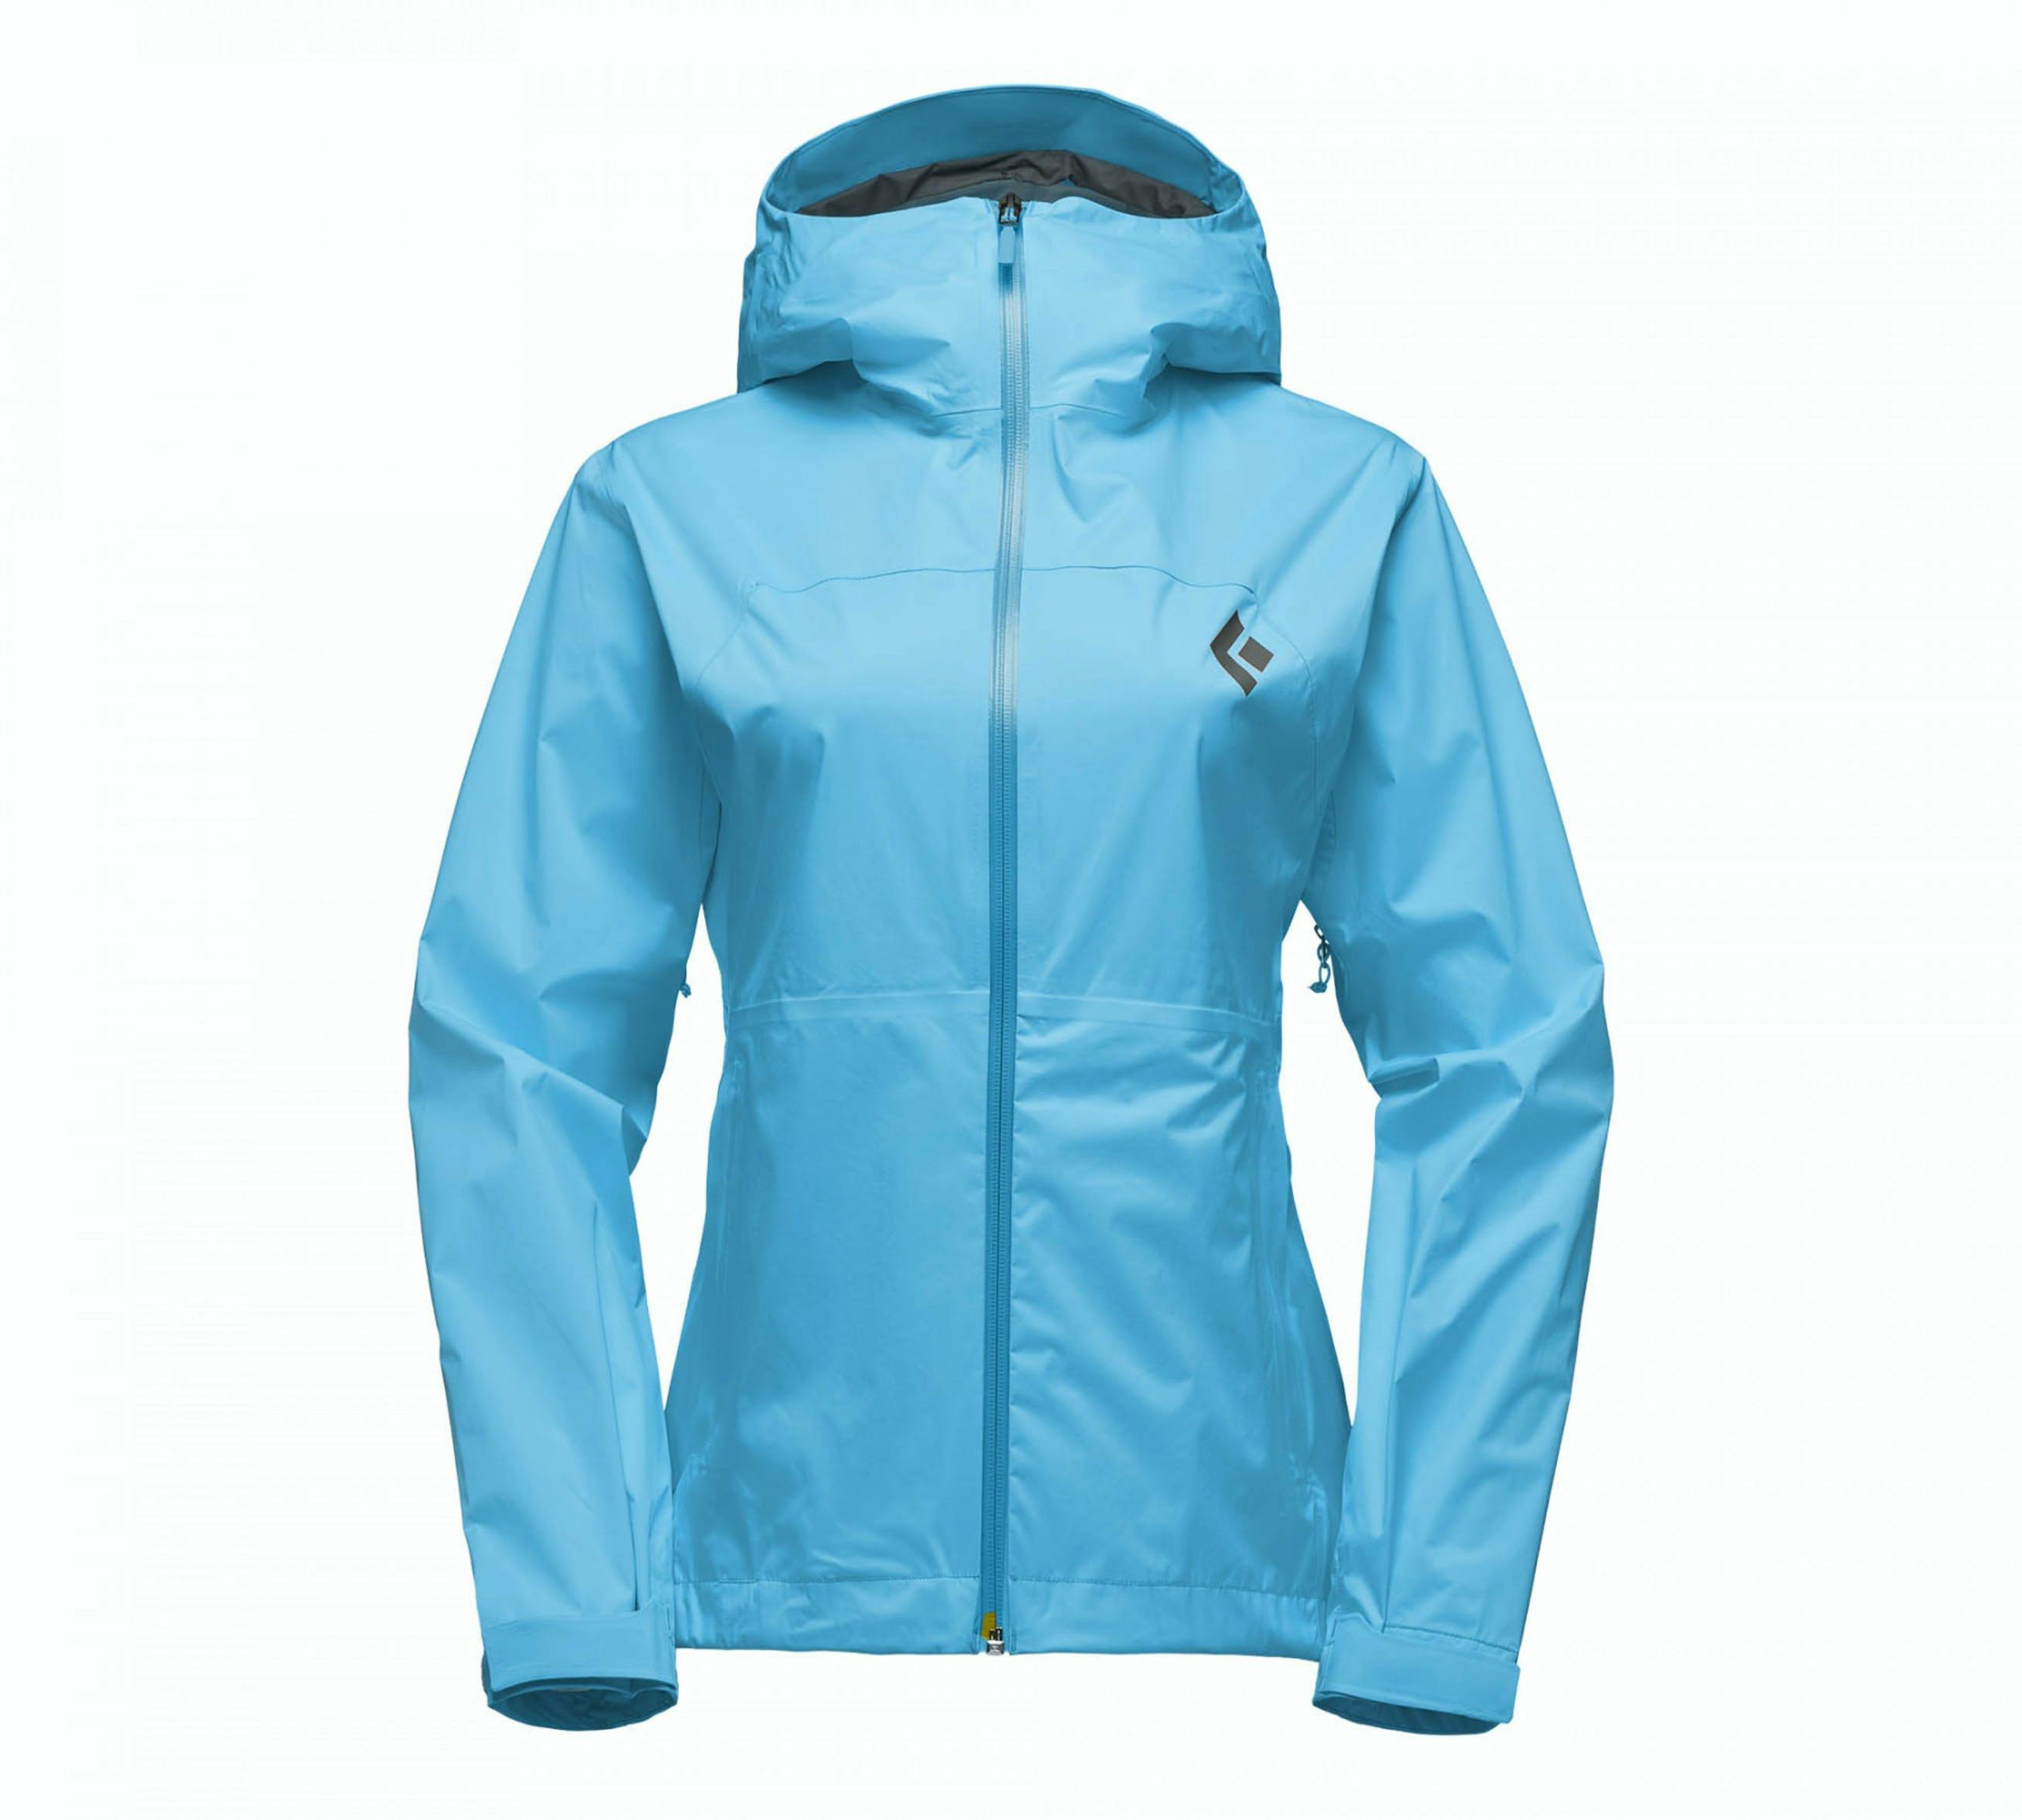 Product image of the Black Diamond Stormline Stretch Women’s Rain Shell in Ocean blue.
